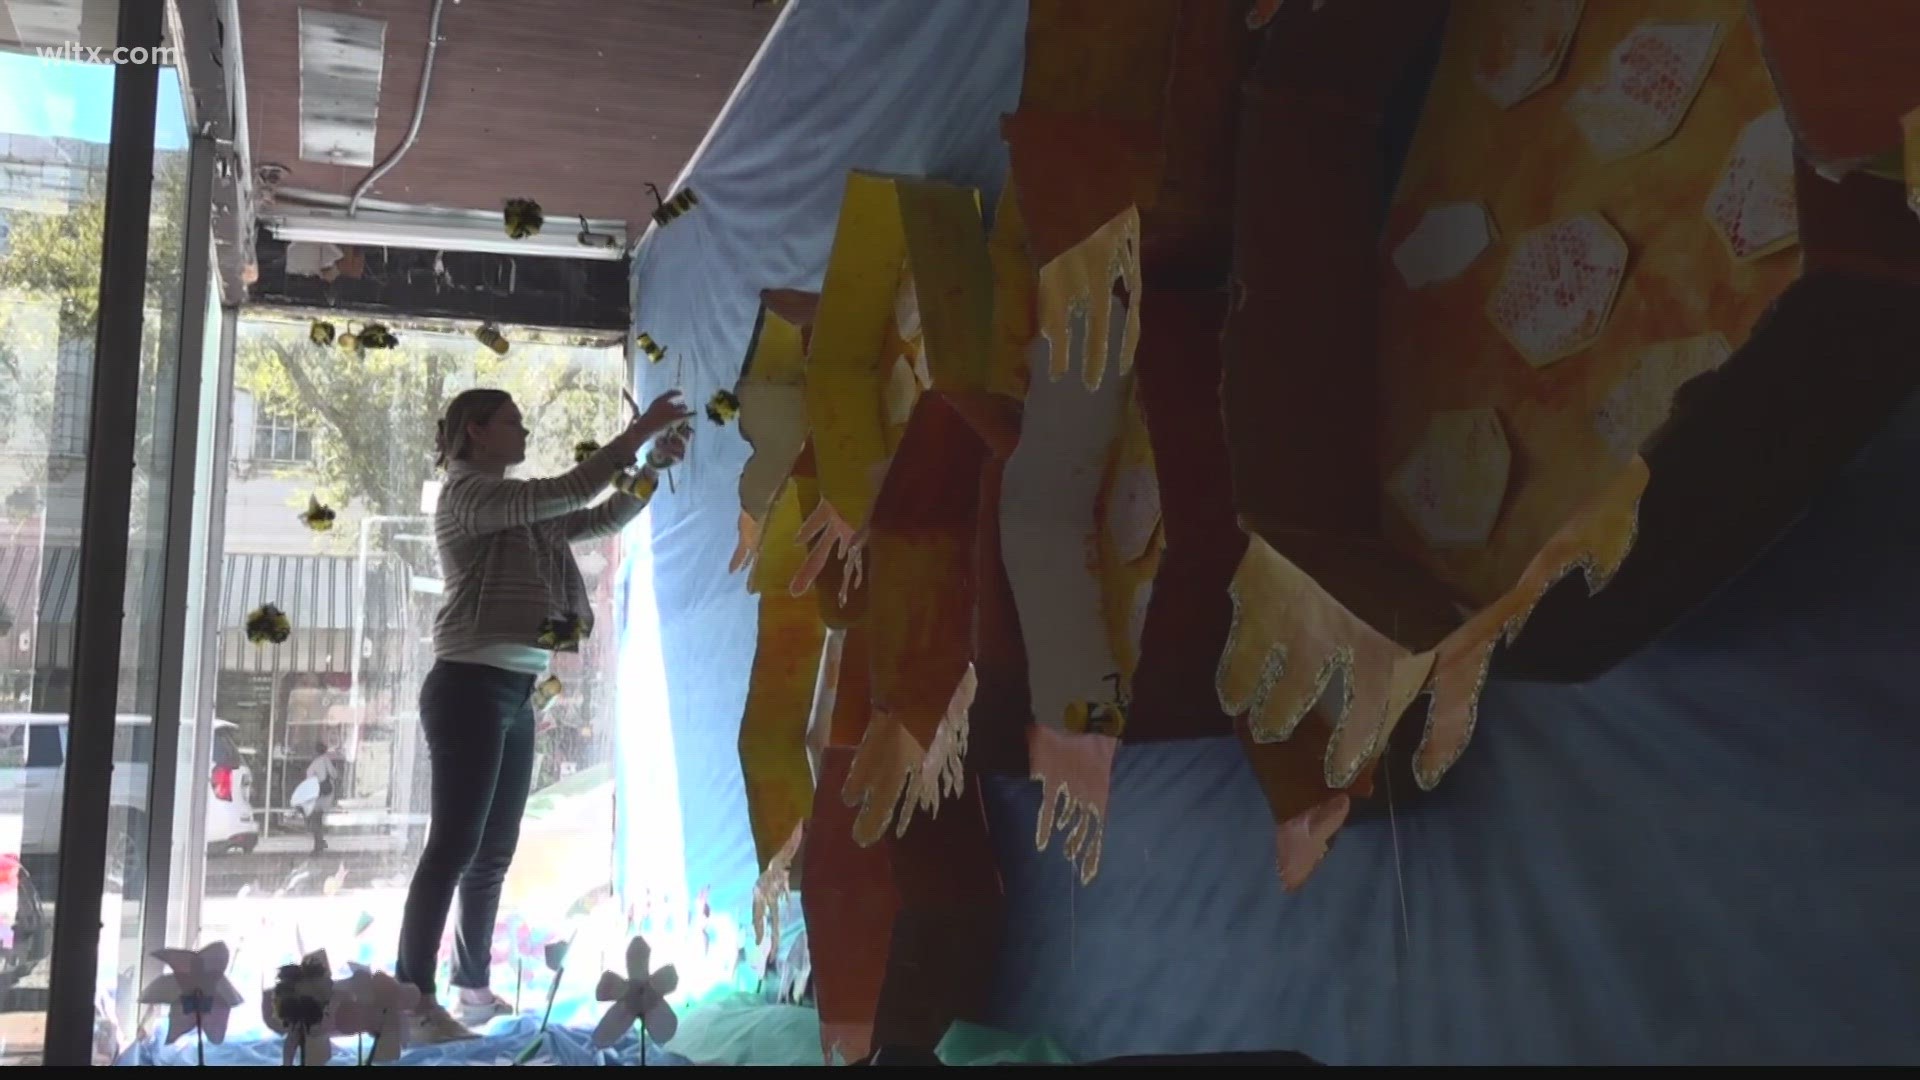 Art teachers, students and artists have begun decorating windows in businesses throughout downtown Sumter for Saturday's Walk of Art as part of the Inspire Festival.